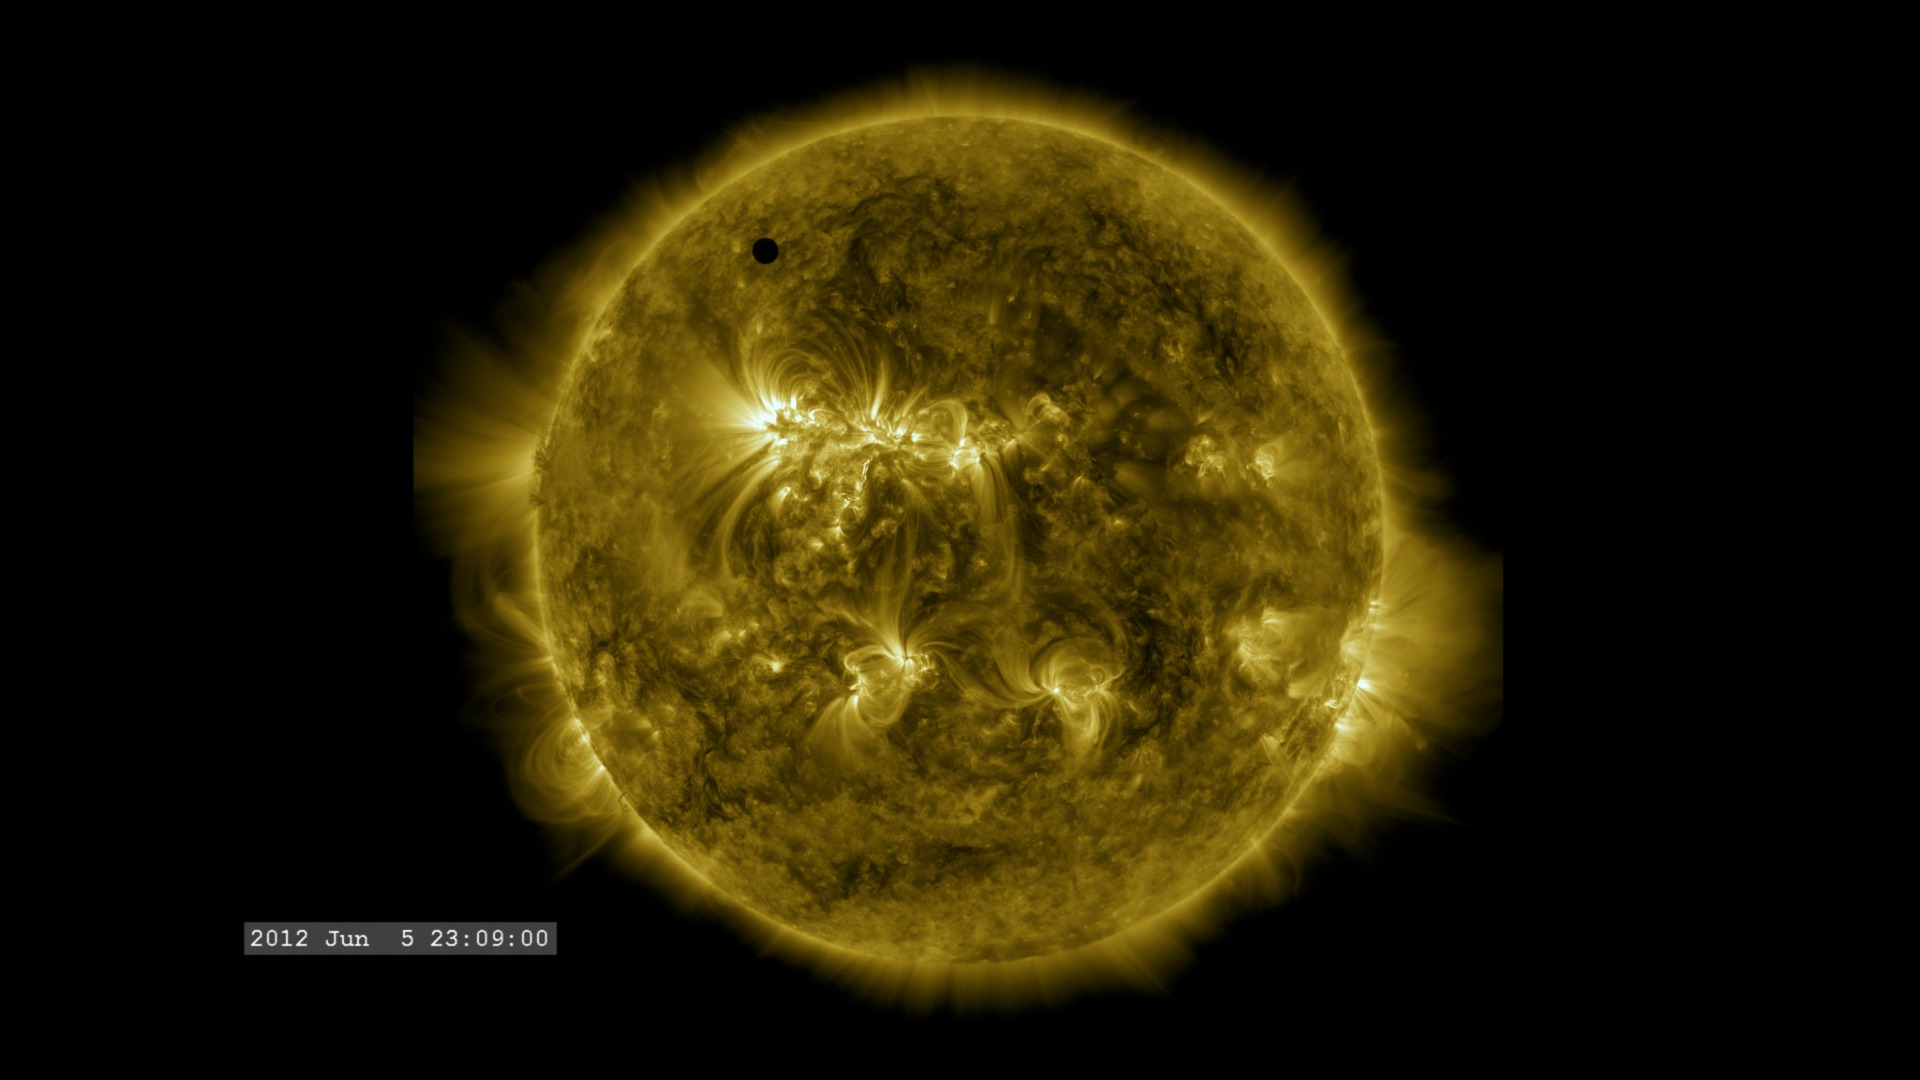 Preview Image for Venus Transit 2012 Composited Visuals